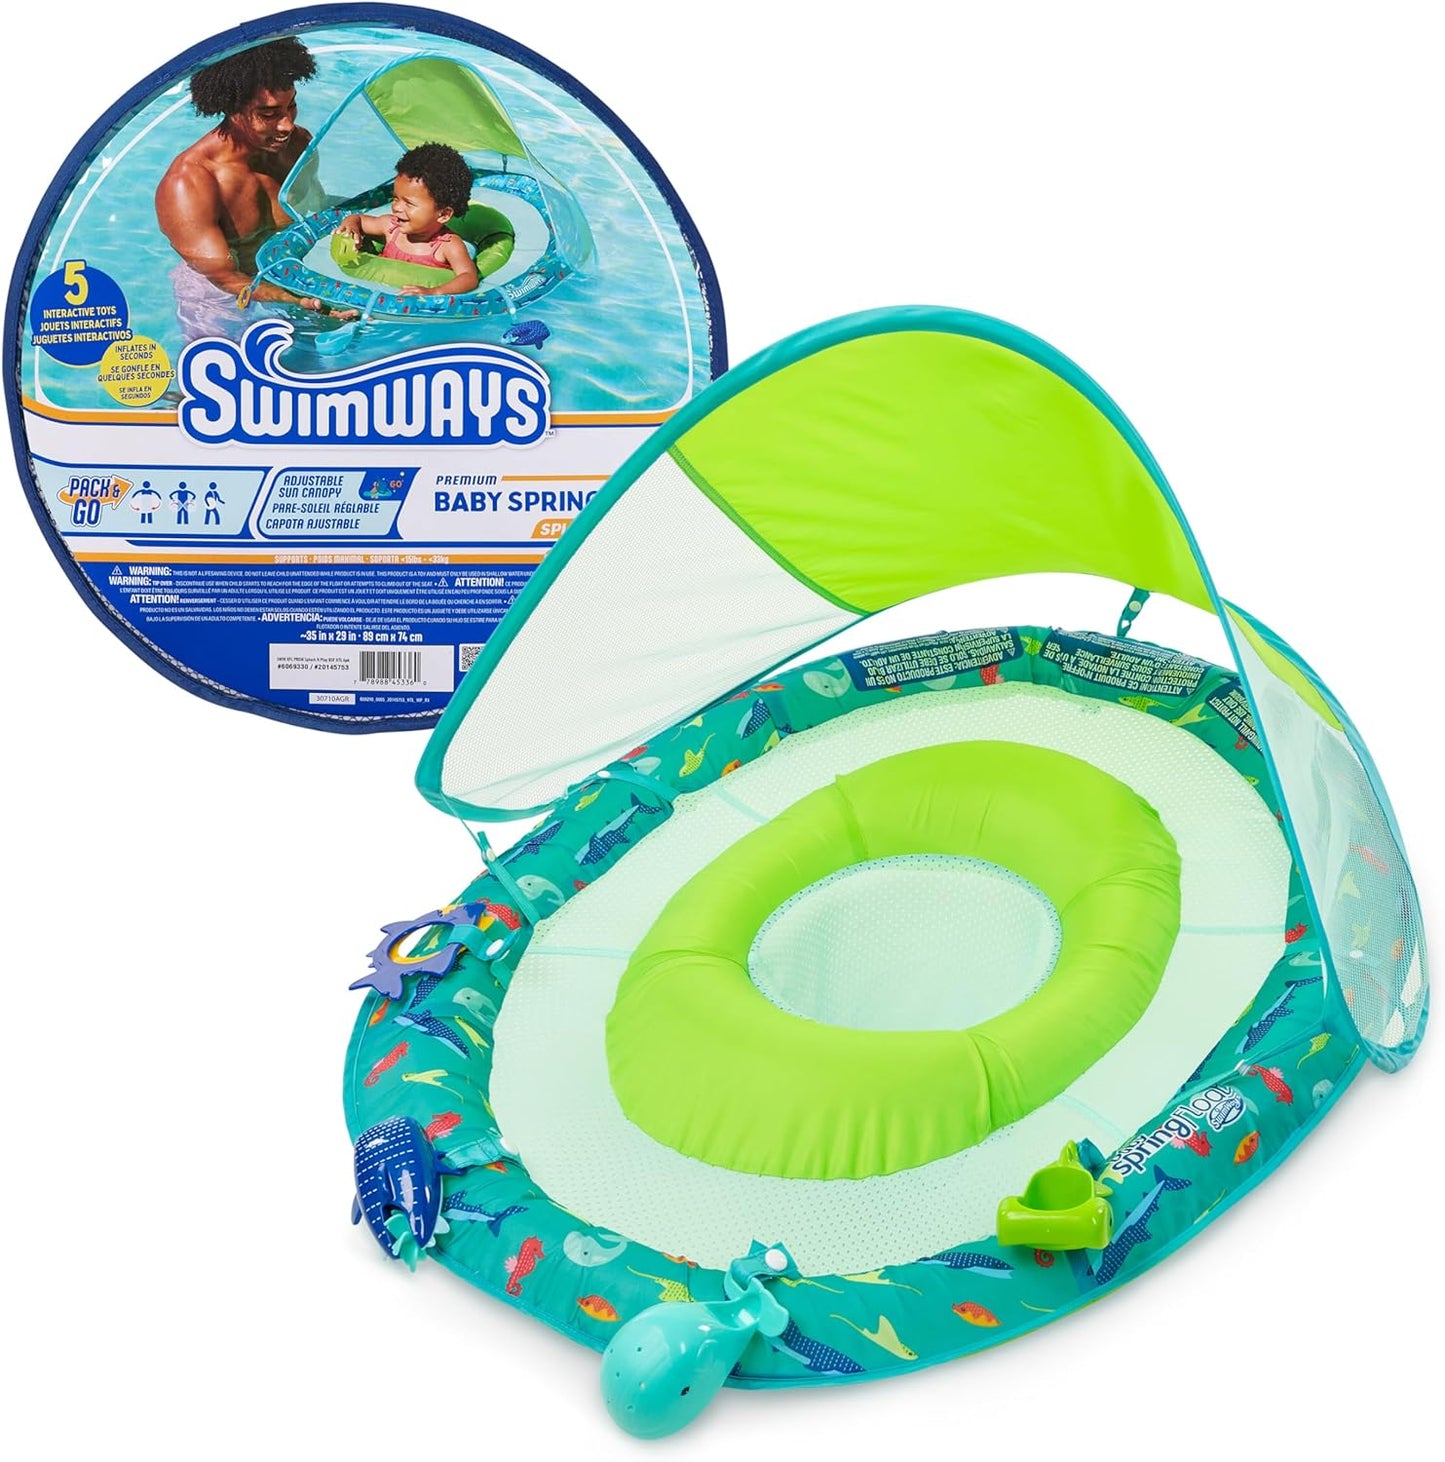 Baby Spring Float Splash N Play, Baby Float with Canopy & UPF Protection, Baby Pool Toys & Swimming Pool Accessories for Kids 9-24 Months